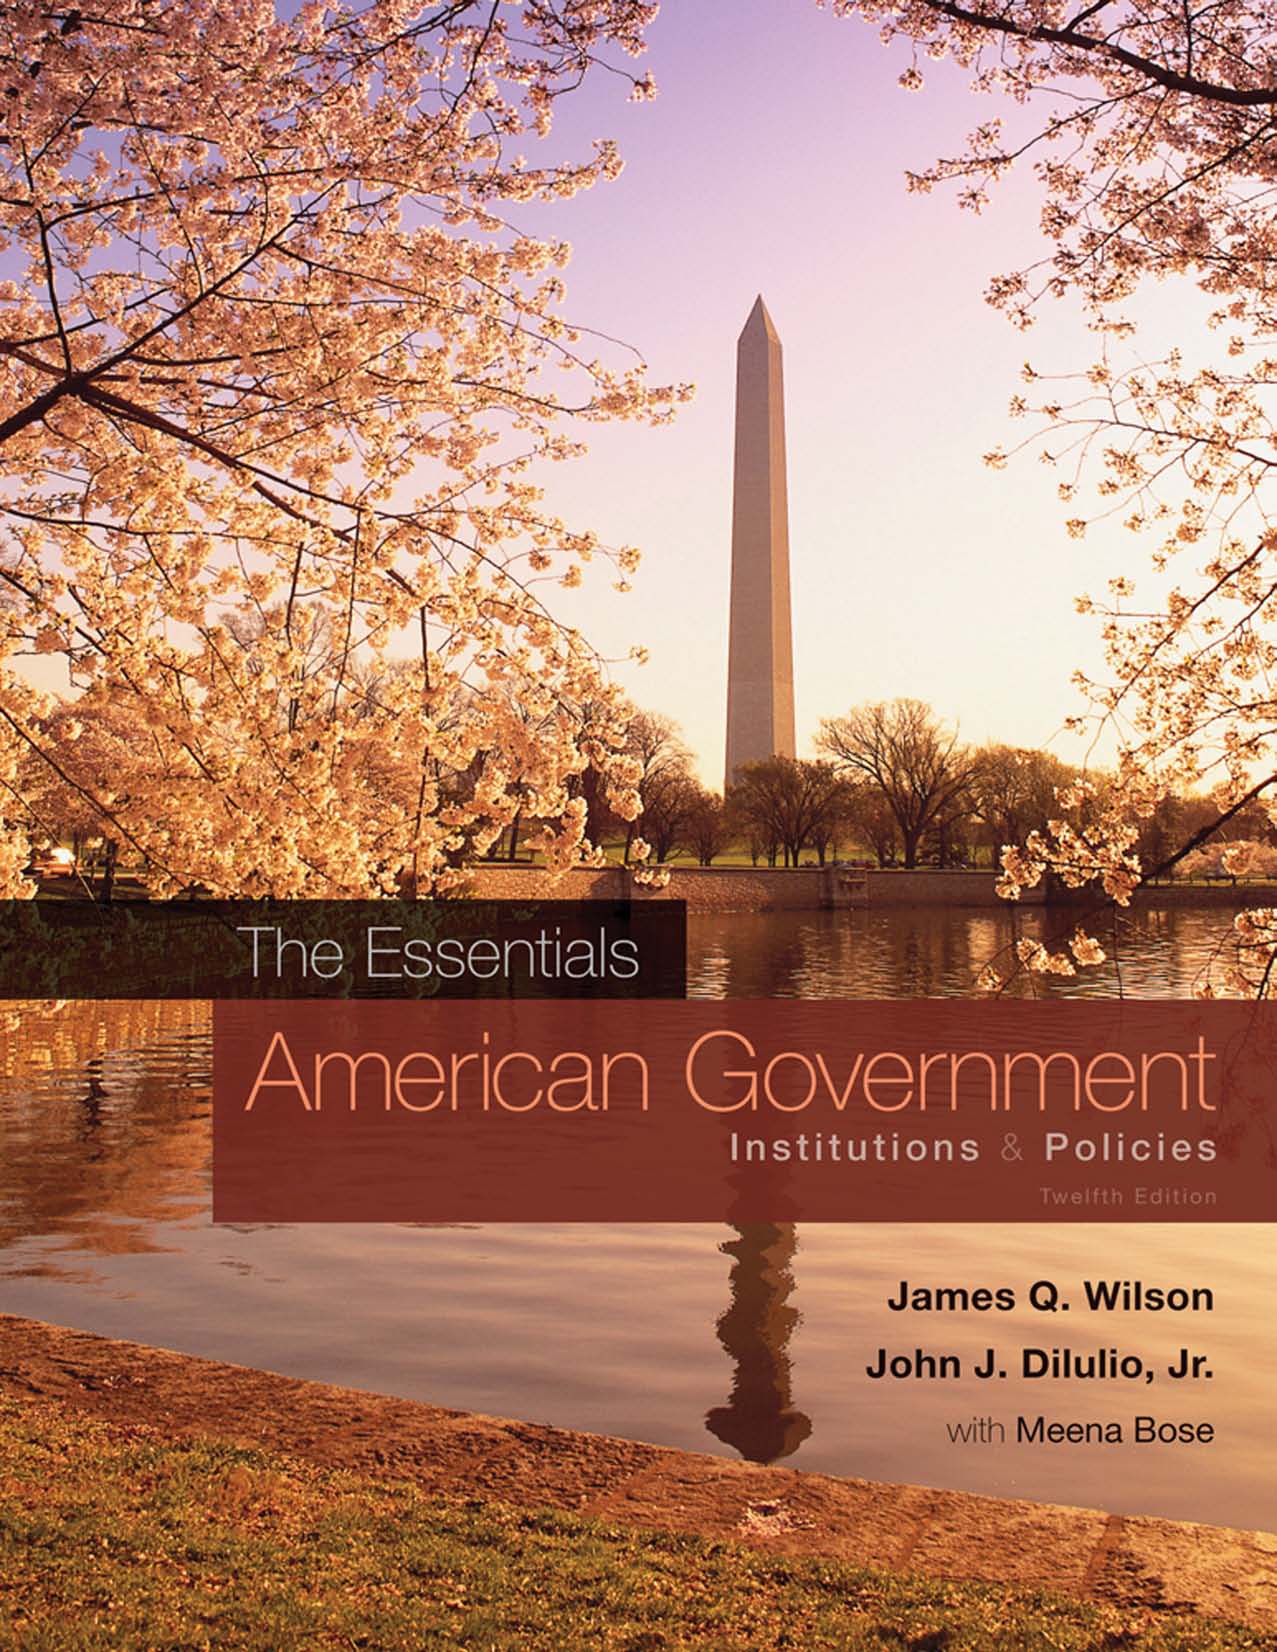 American Government, the Essentials